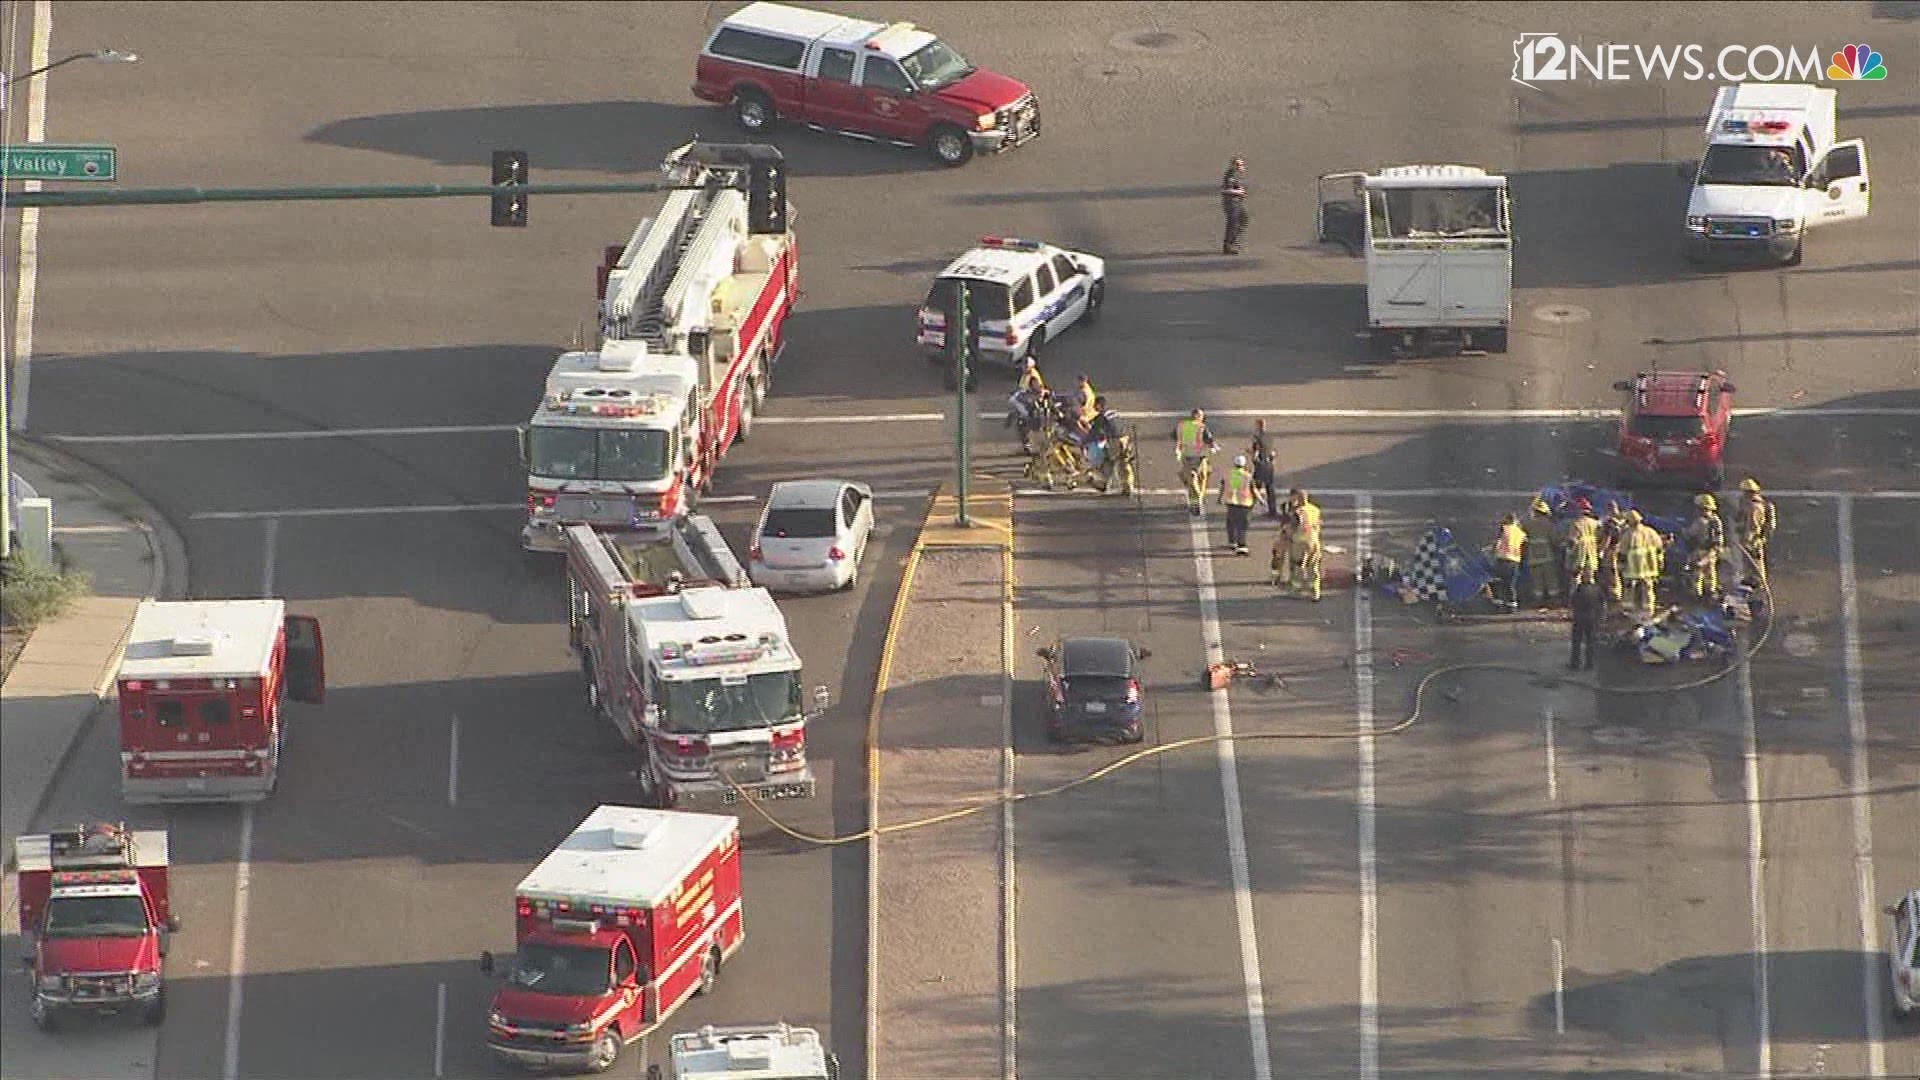 A plane crashes in Phoenix intersection near Deer Valley Airport.